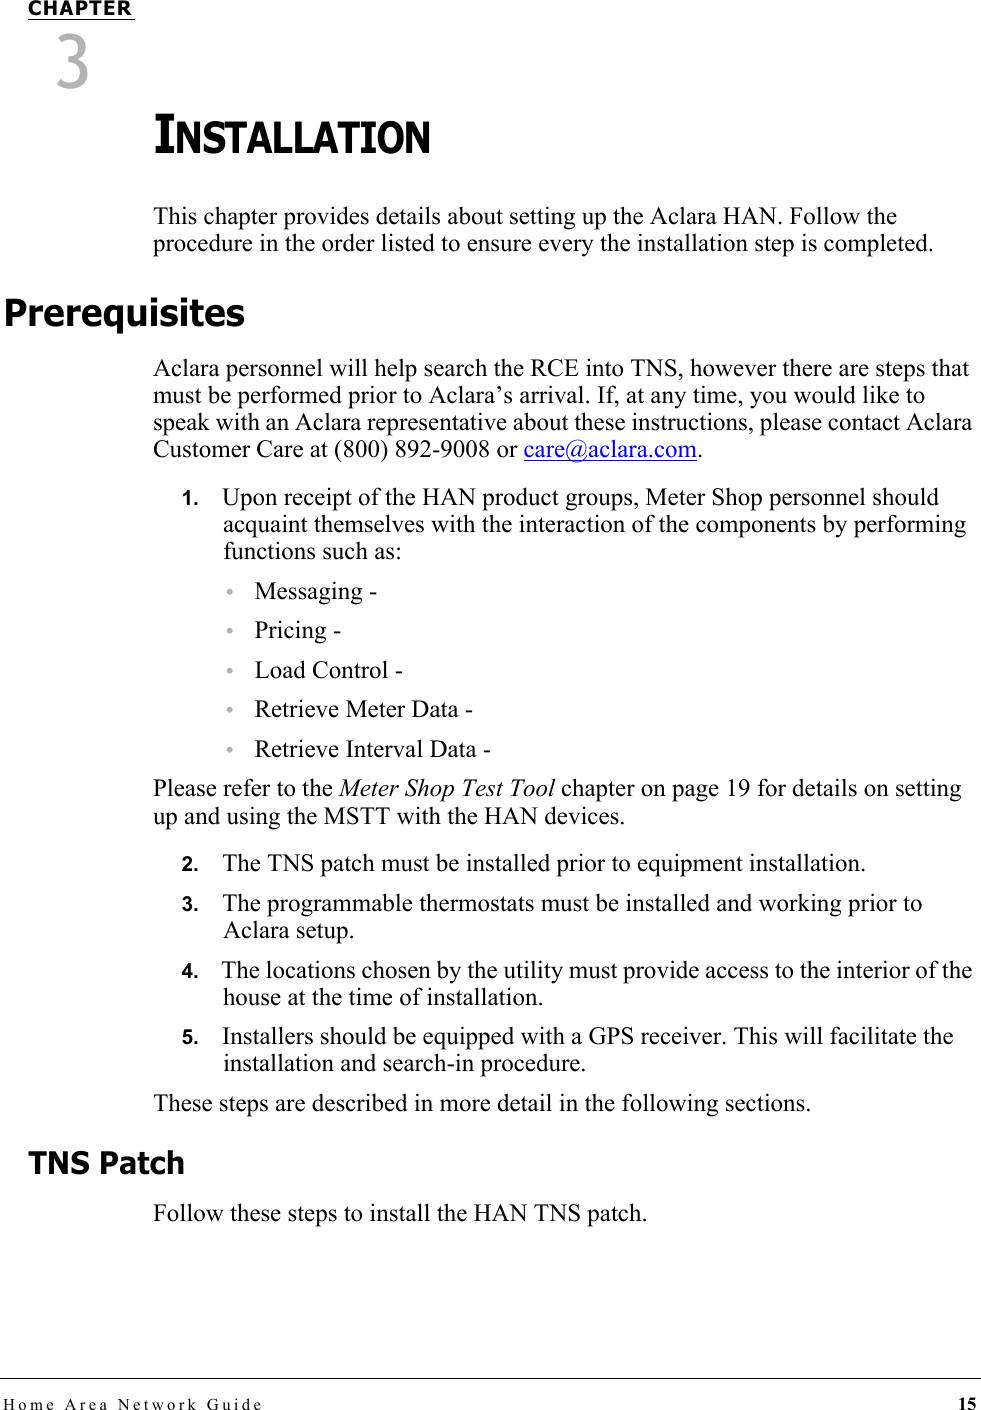 Home Area Network Guide 15CHAPTER3INSTALLATIONThis chapter provides details about setting up the Aclara HAN. Follow the procedure in the order listed to ensure every the installation step is completed.PrerequisitesAclara personnel will help search the RCE into TNS, however there are steps that must be performed prior to Aclara’s arrival. If, at any time, you would like to speak with an Aclara representative about these instructions, please contact Aclara Customer Care at (800) 892-9008 or care@aclara.com.1.   Upon receipt of the HAN product groups, Meter Shop personnel should acquaint themselves with the interaction of the components by performing functions such as:•Messaging - •Pricing - •Load Control - •Retrieve Meter Data - •Retrieve Interval Data - Please refer to the Meter Shop Test Tool chapter on page 19 for details on setting up and using the MSTT with the HAN devices.2.   The TNS patch must be installed prior to equipment installation.3.   The programmable thermostats must be installed and working prior to Aclara setup.4.   The locations chosen by the utility must provide access to the interior of the house at the time of installation.5.   Installers should be equipped with a GPS receiver. This will facilitate the installation and search-in procedure. These steps are described in more detail in the following sections.TNS PatchFollow these steps to install the HAN TNS patch.